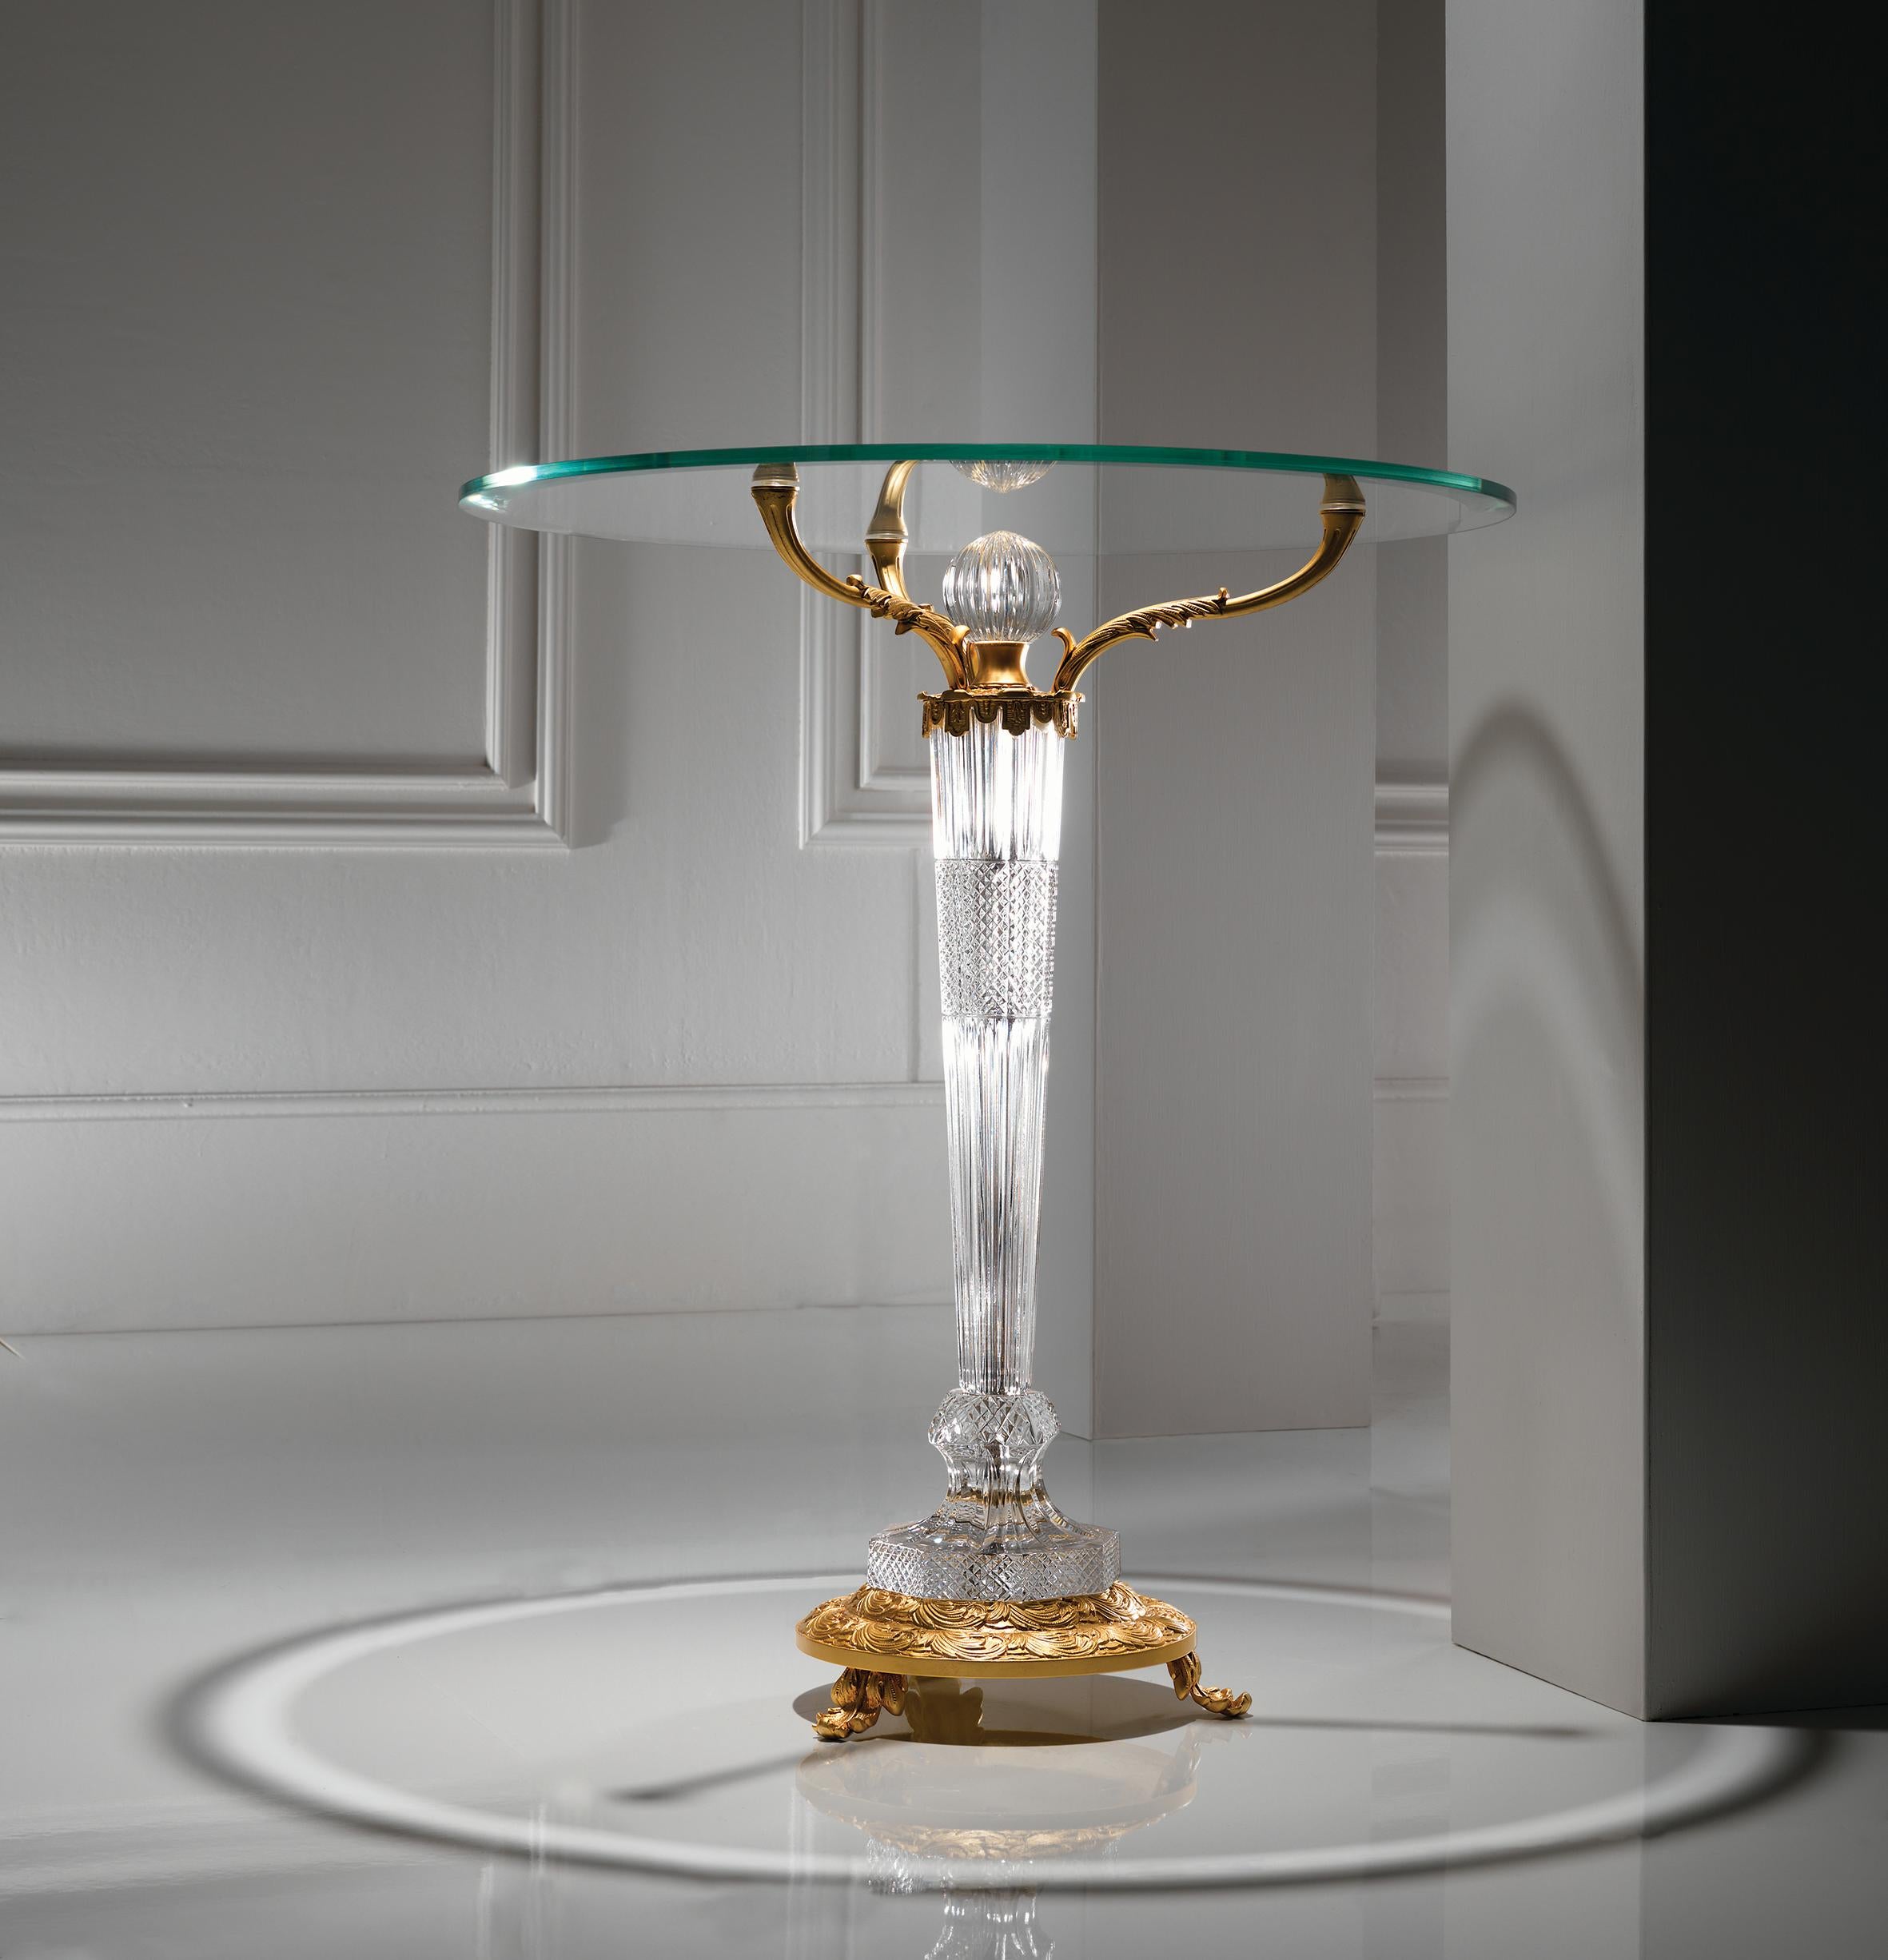 Clear crystal and French gold bronze side table with one legs and the temperated glass top. The parts in crystal are hand-carved. Each object is handcrafted and the care for every detail makes each item unique in its kind. The style of this side